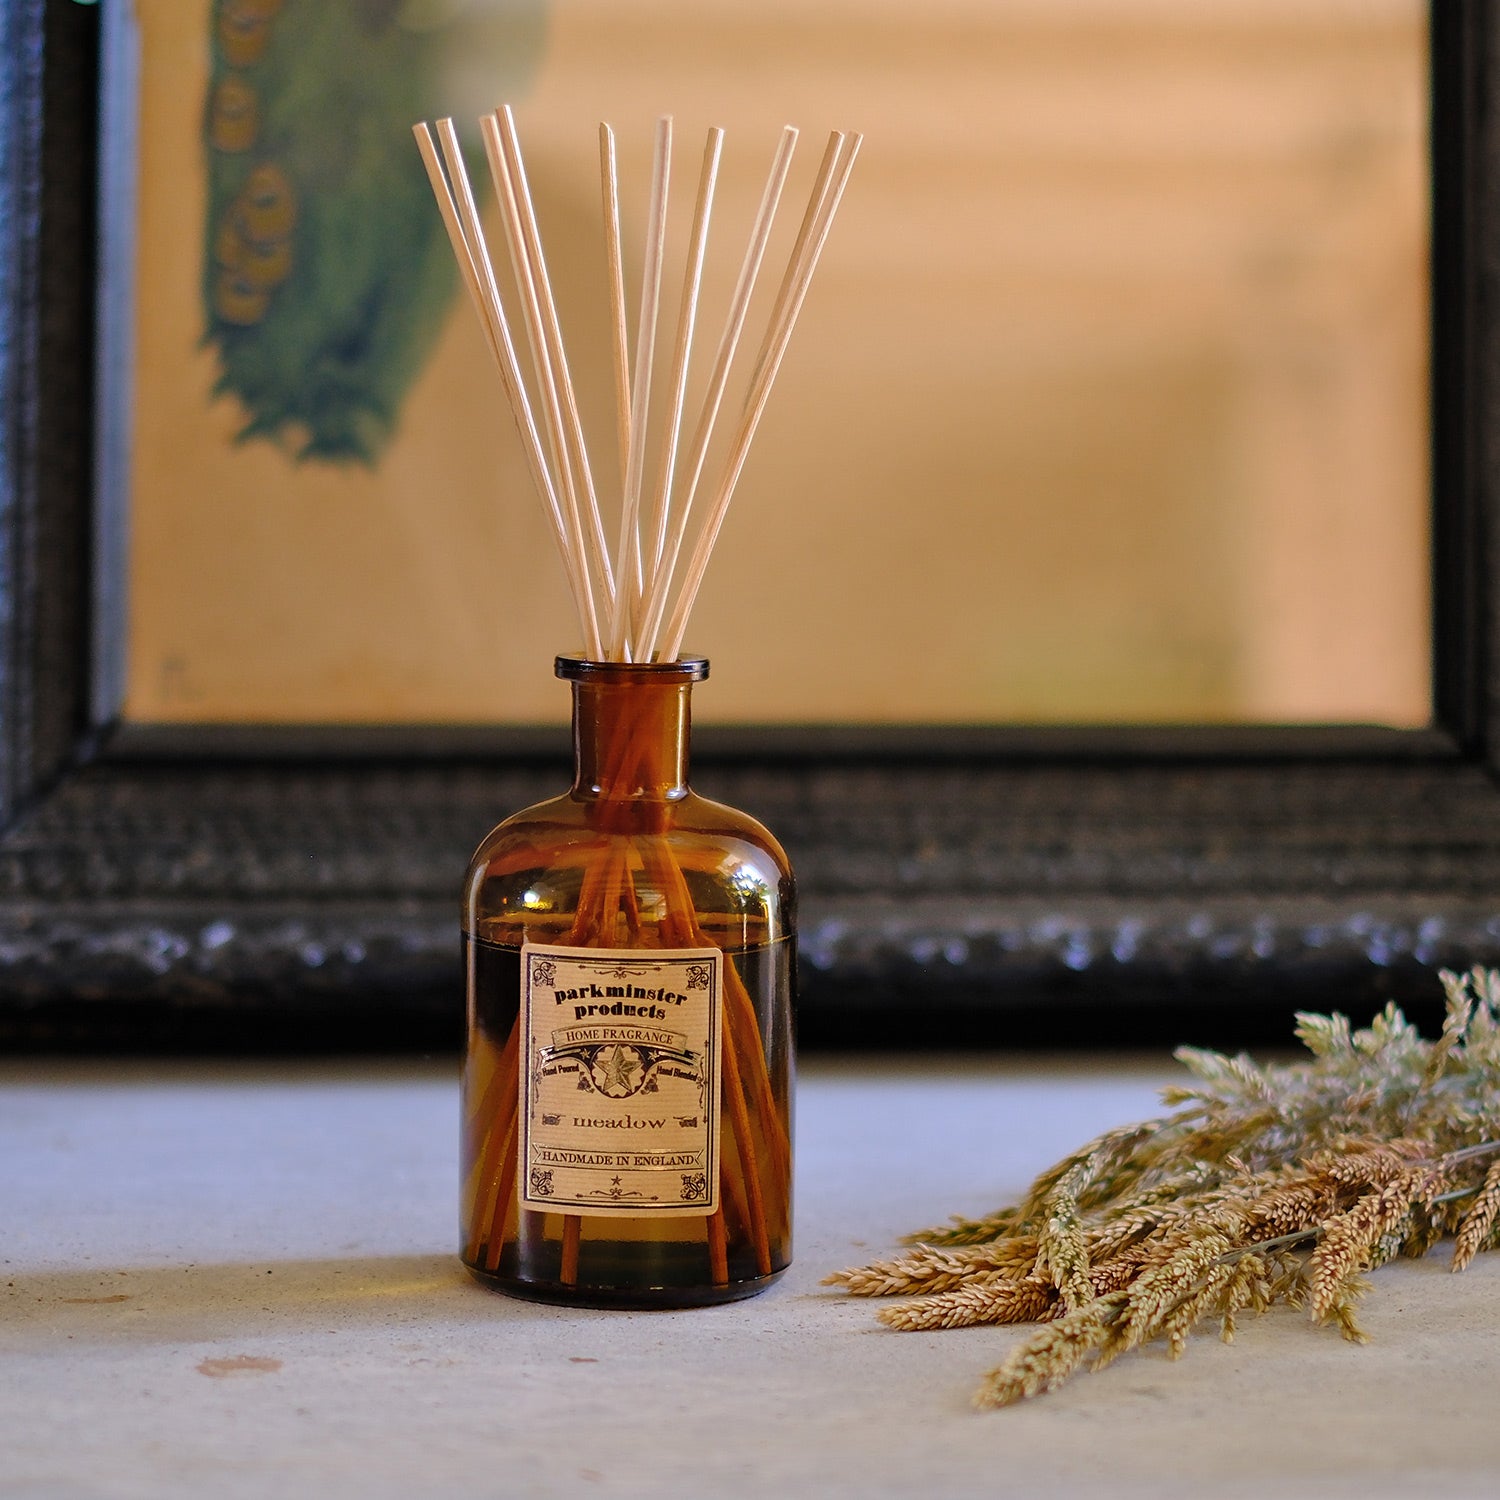 Transform your space with the Meadow Reed Diffuser, 200ml by Parkminster Home Fragrance, capturing Cornwall's natural beauty